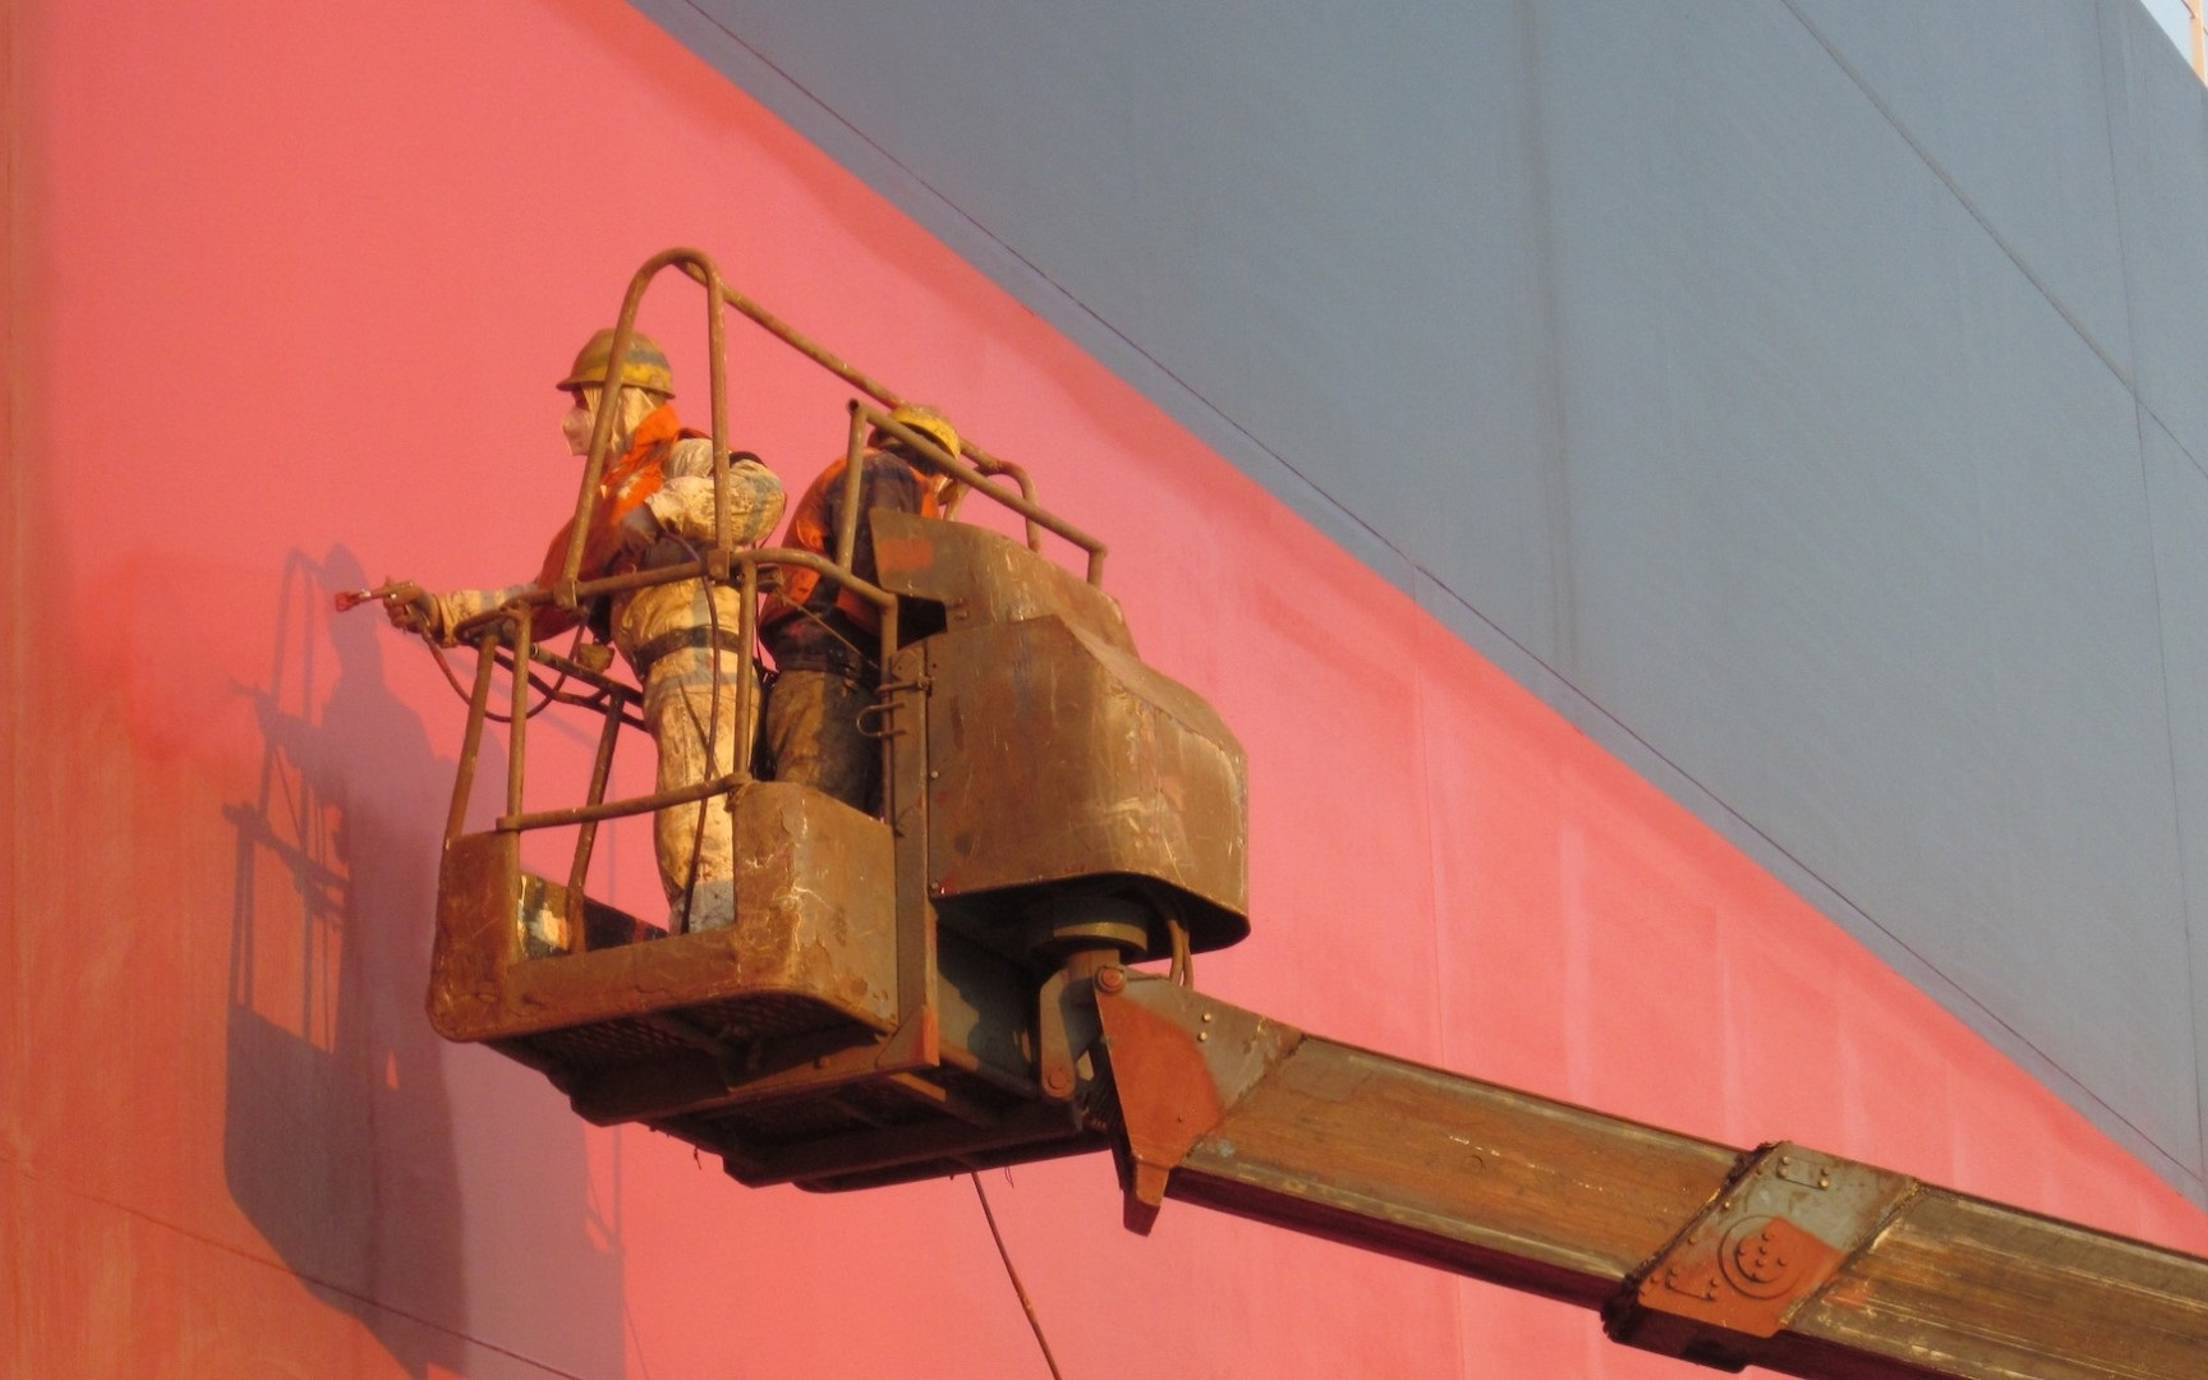 Two applicators spray painting red ship hull